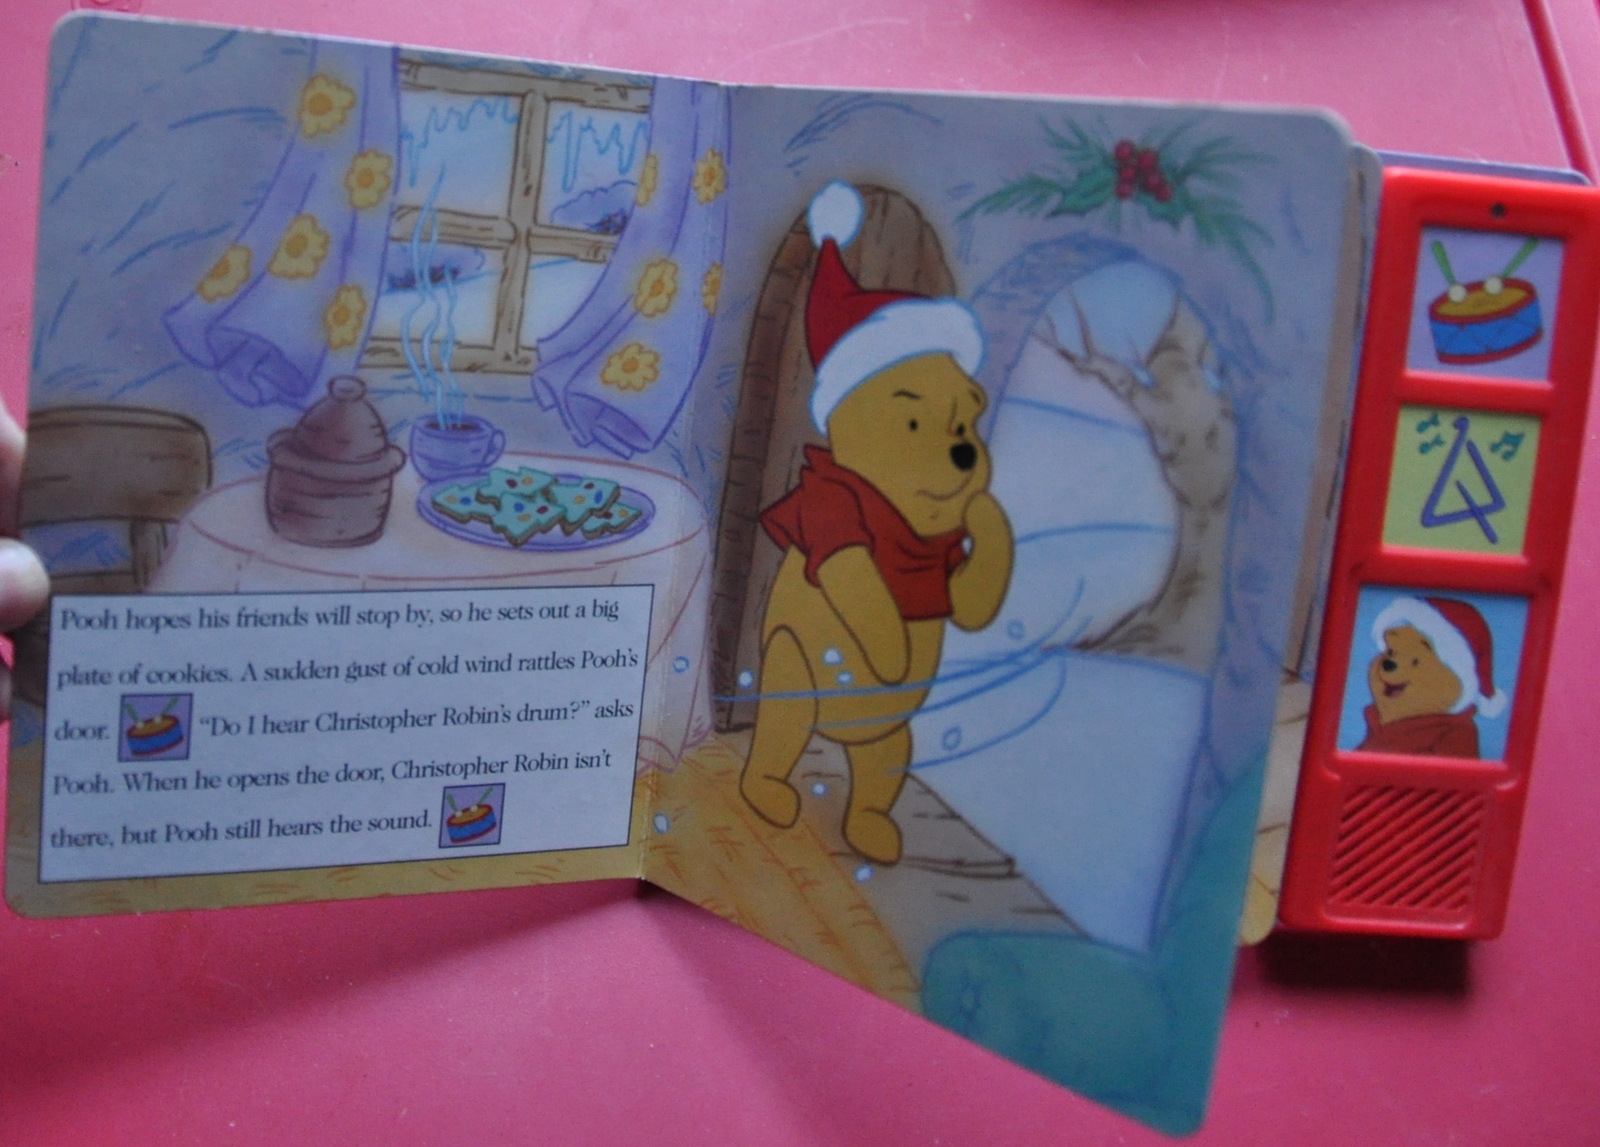 Download Board Book Play a Sound - Winnie the Pooh - Pooh's Winter ...